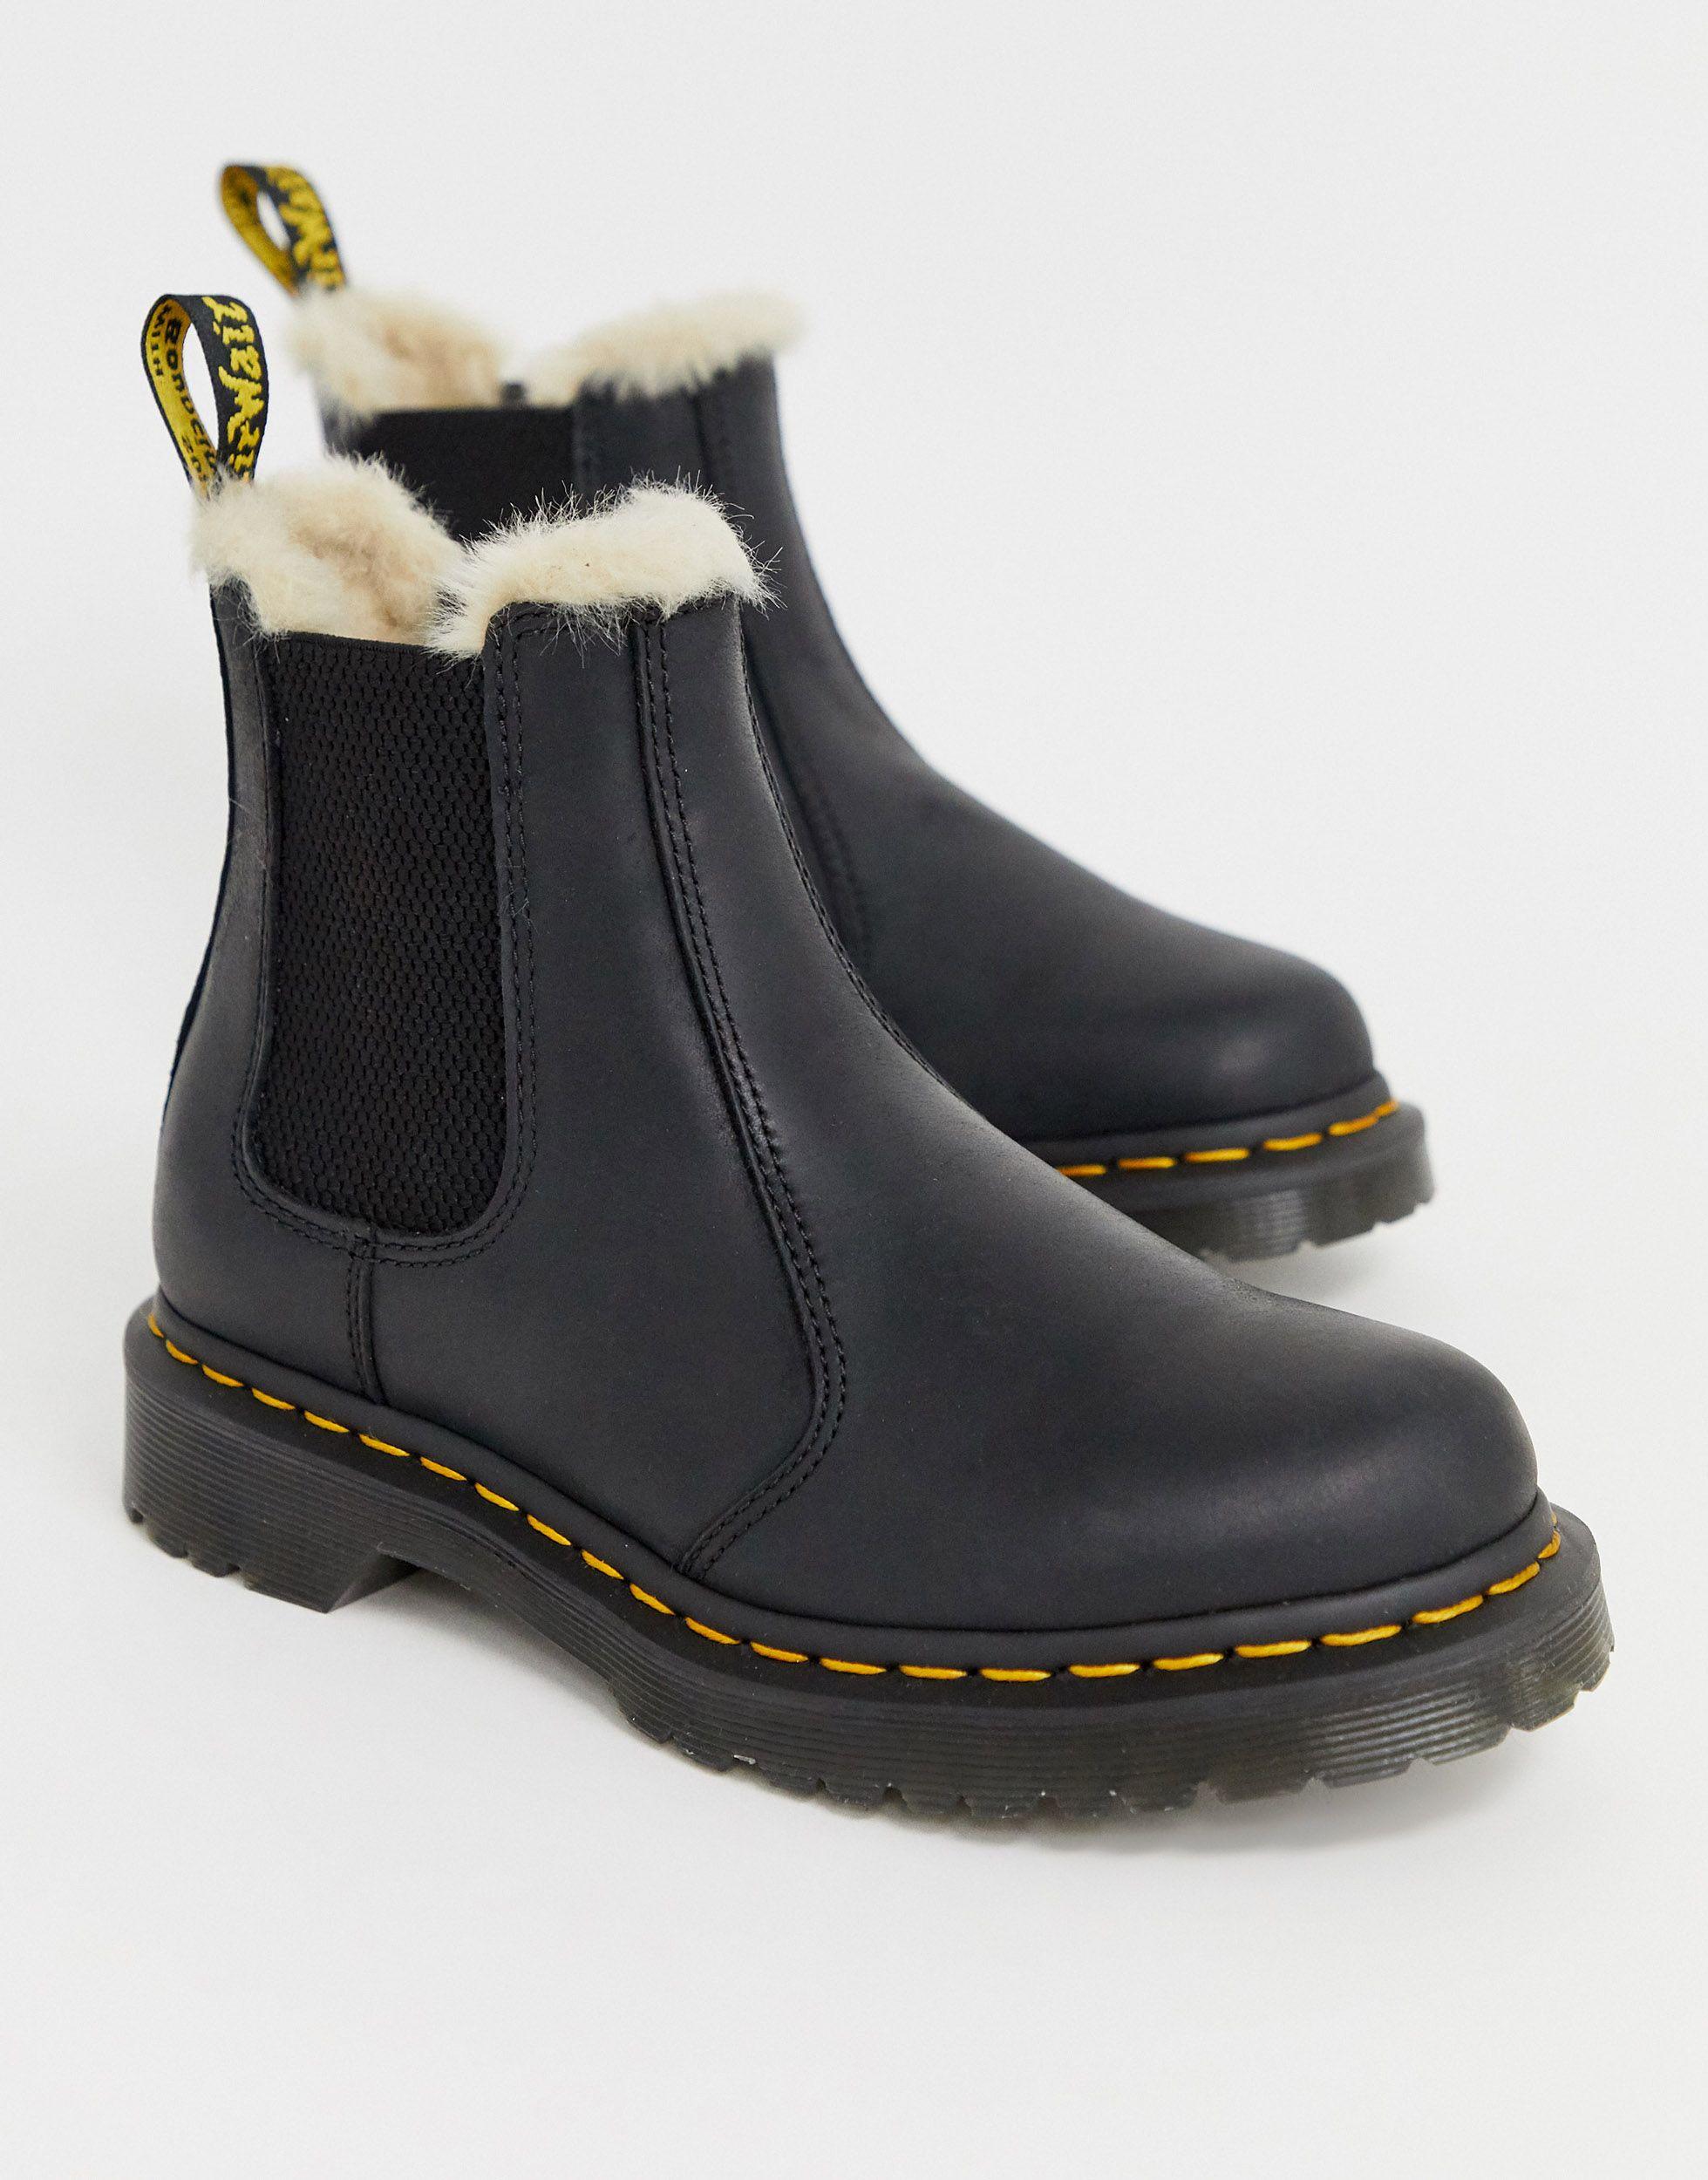 Dr. Martens Leonore Faux Fur Lined Chelsea Boot in Black - Save 81% - Lyst